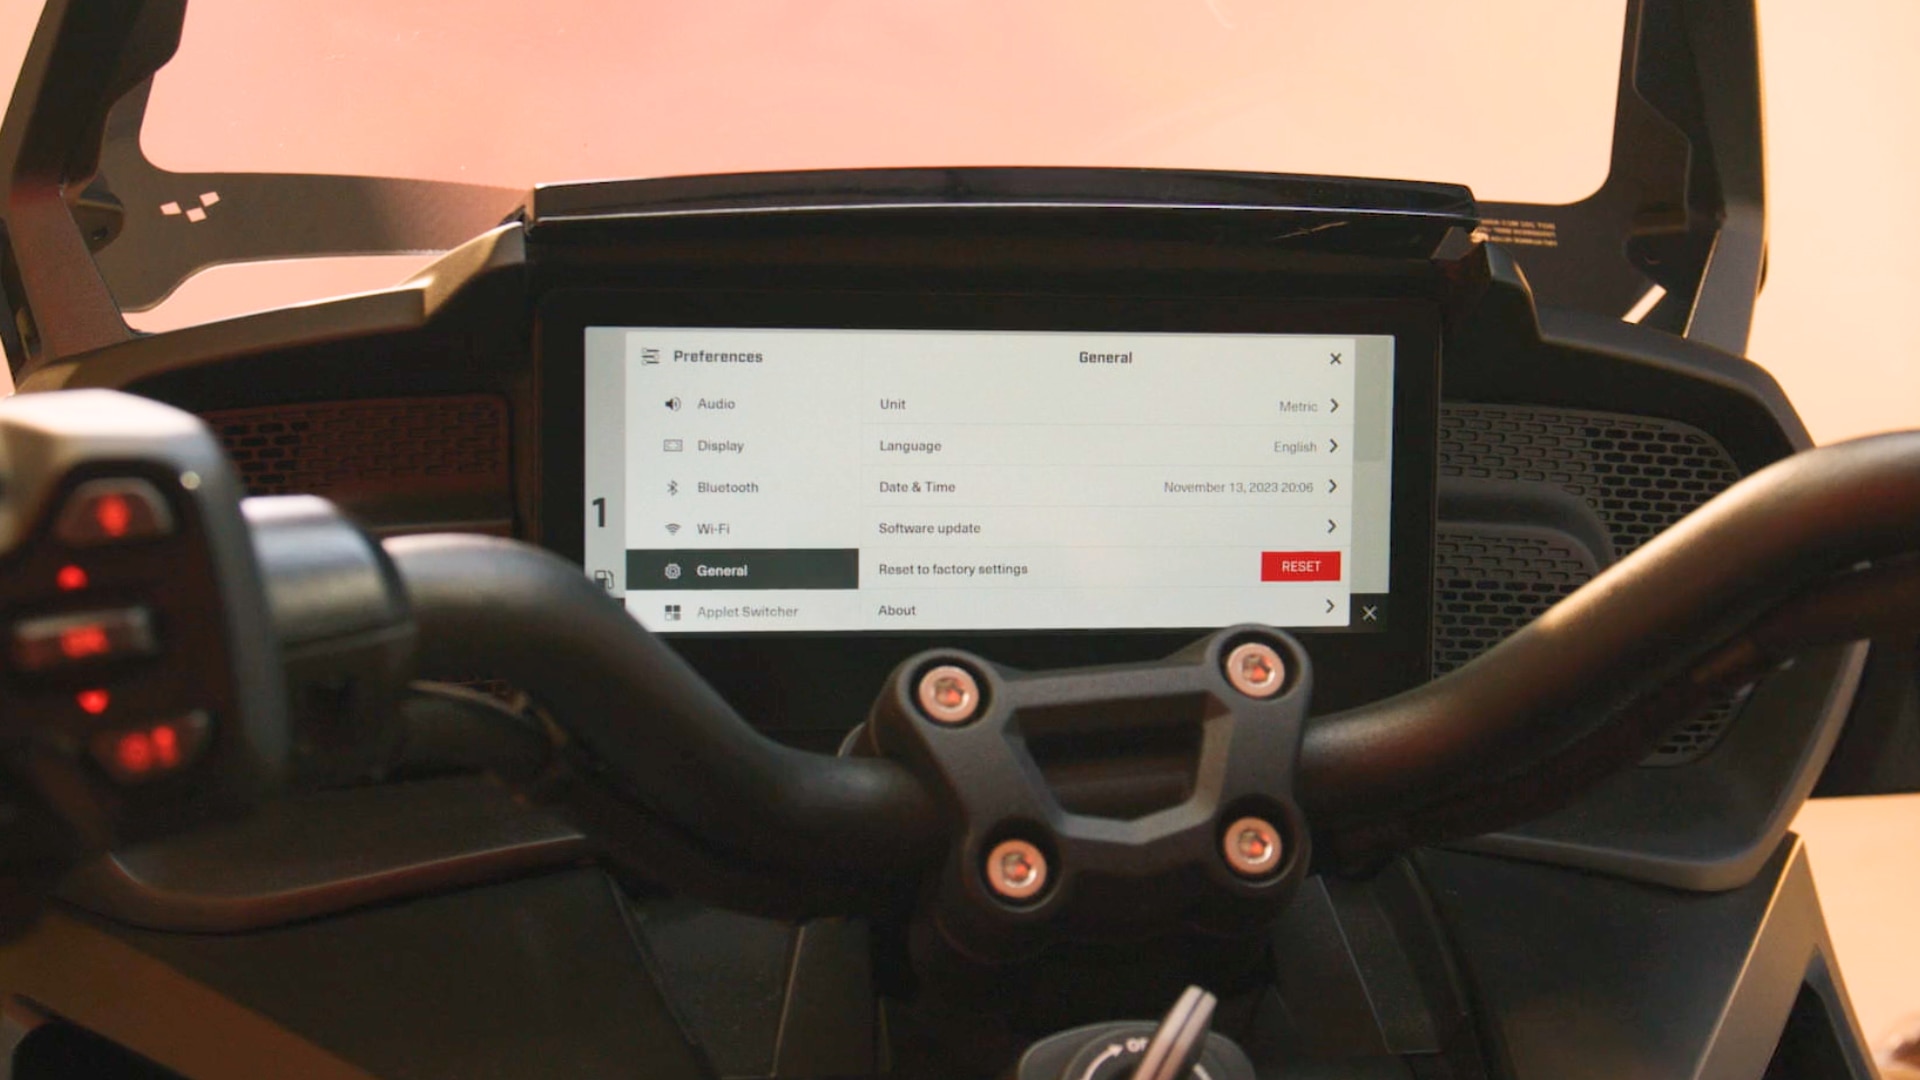 How to update the software on the Can-Am Spyder 10.25” touchscreen display